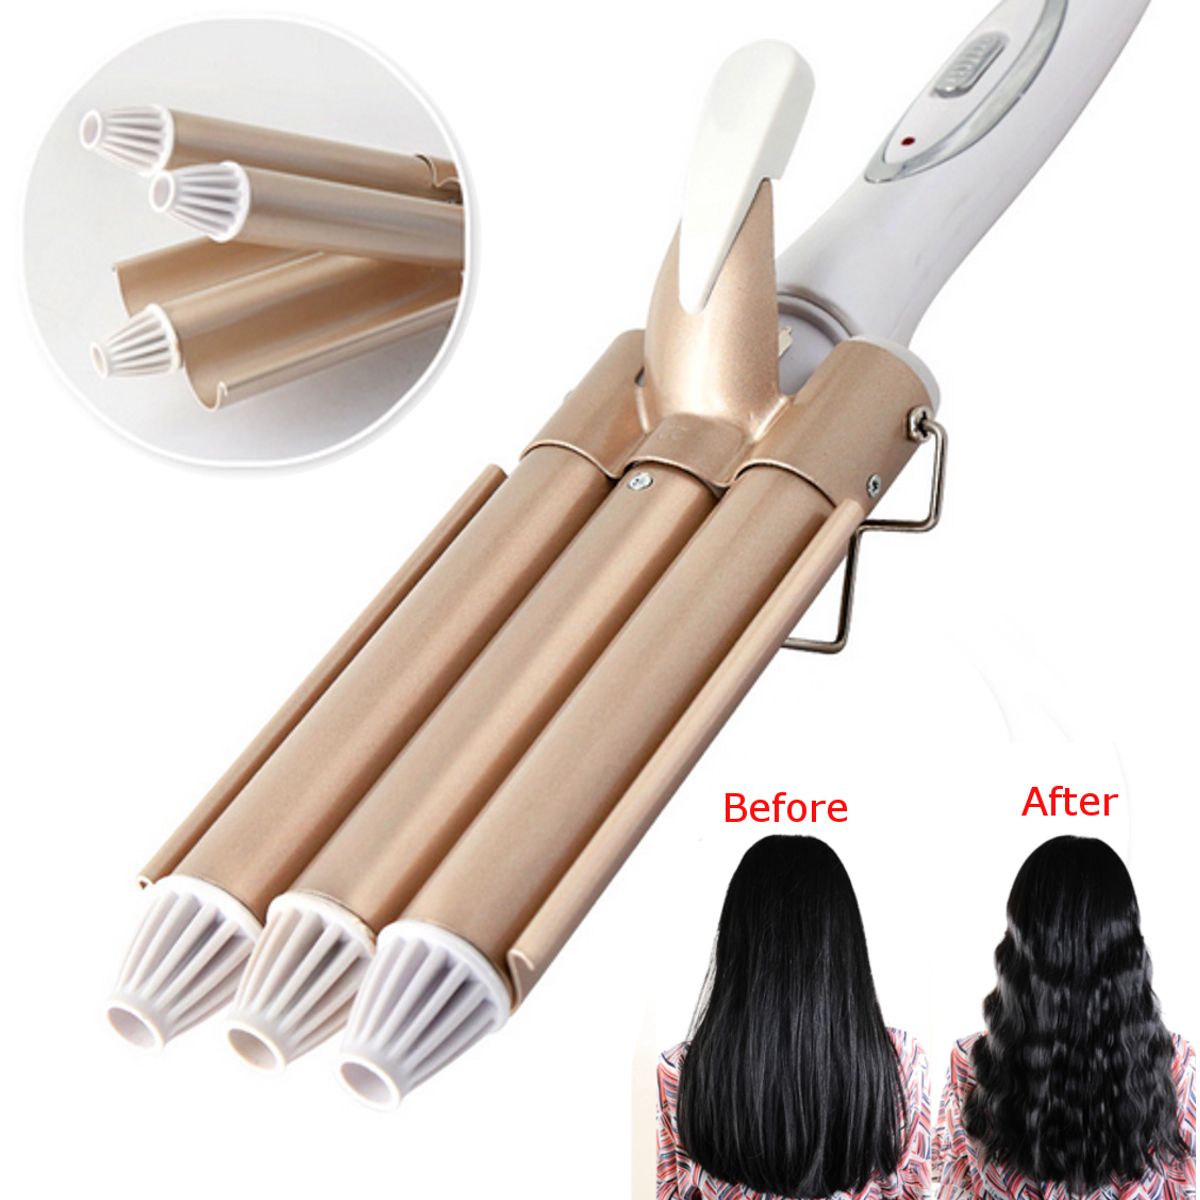 3 Barrels Automatic Hair Curler Ceramic Large Wave Perm Splint Curling Rollers Iron Styling Tools